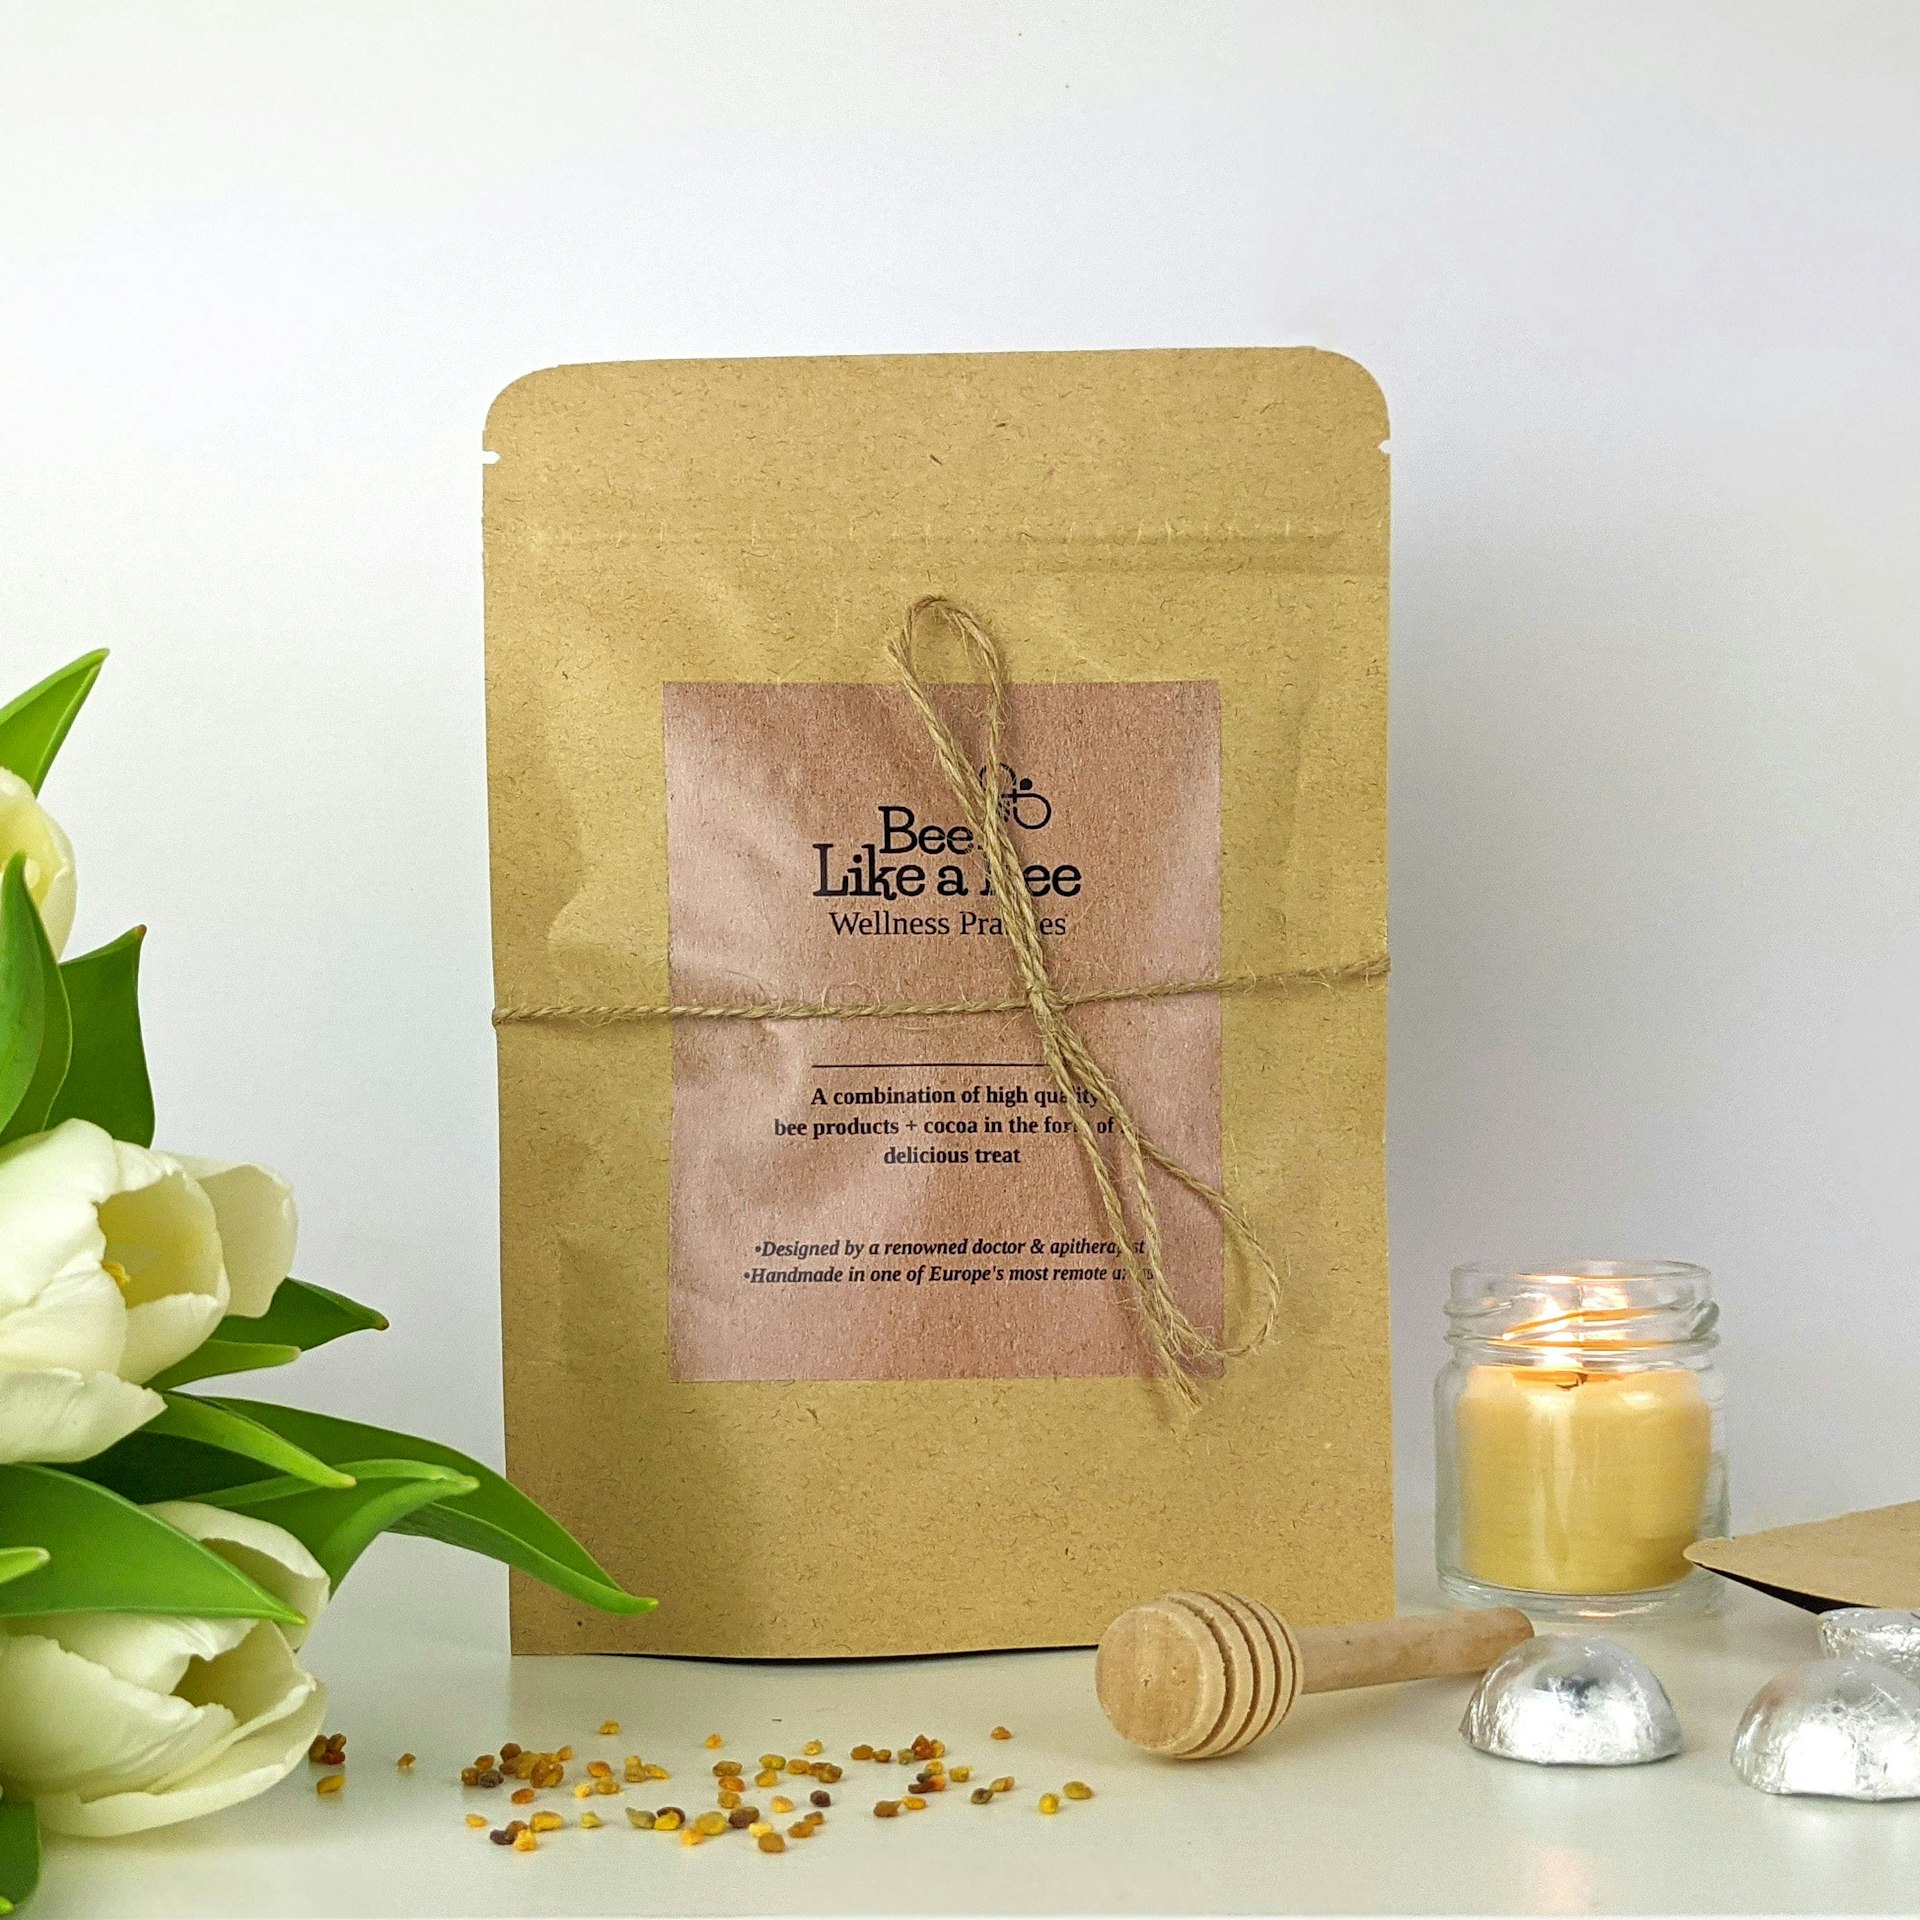 Spotlight on: Natural Wellbeing with Theenk Tea